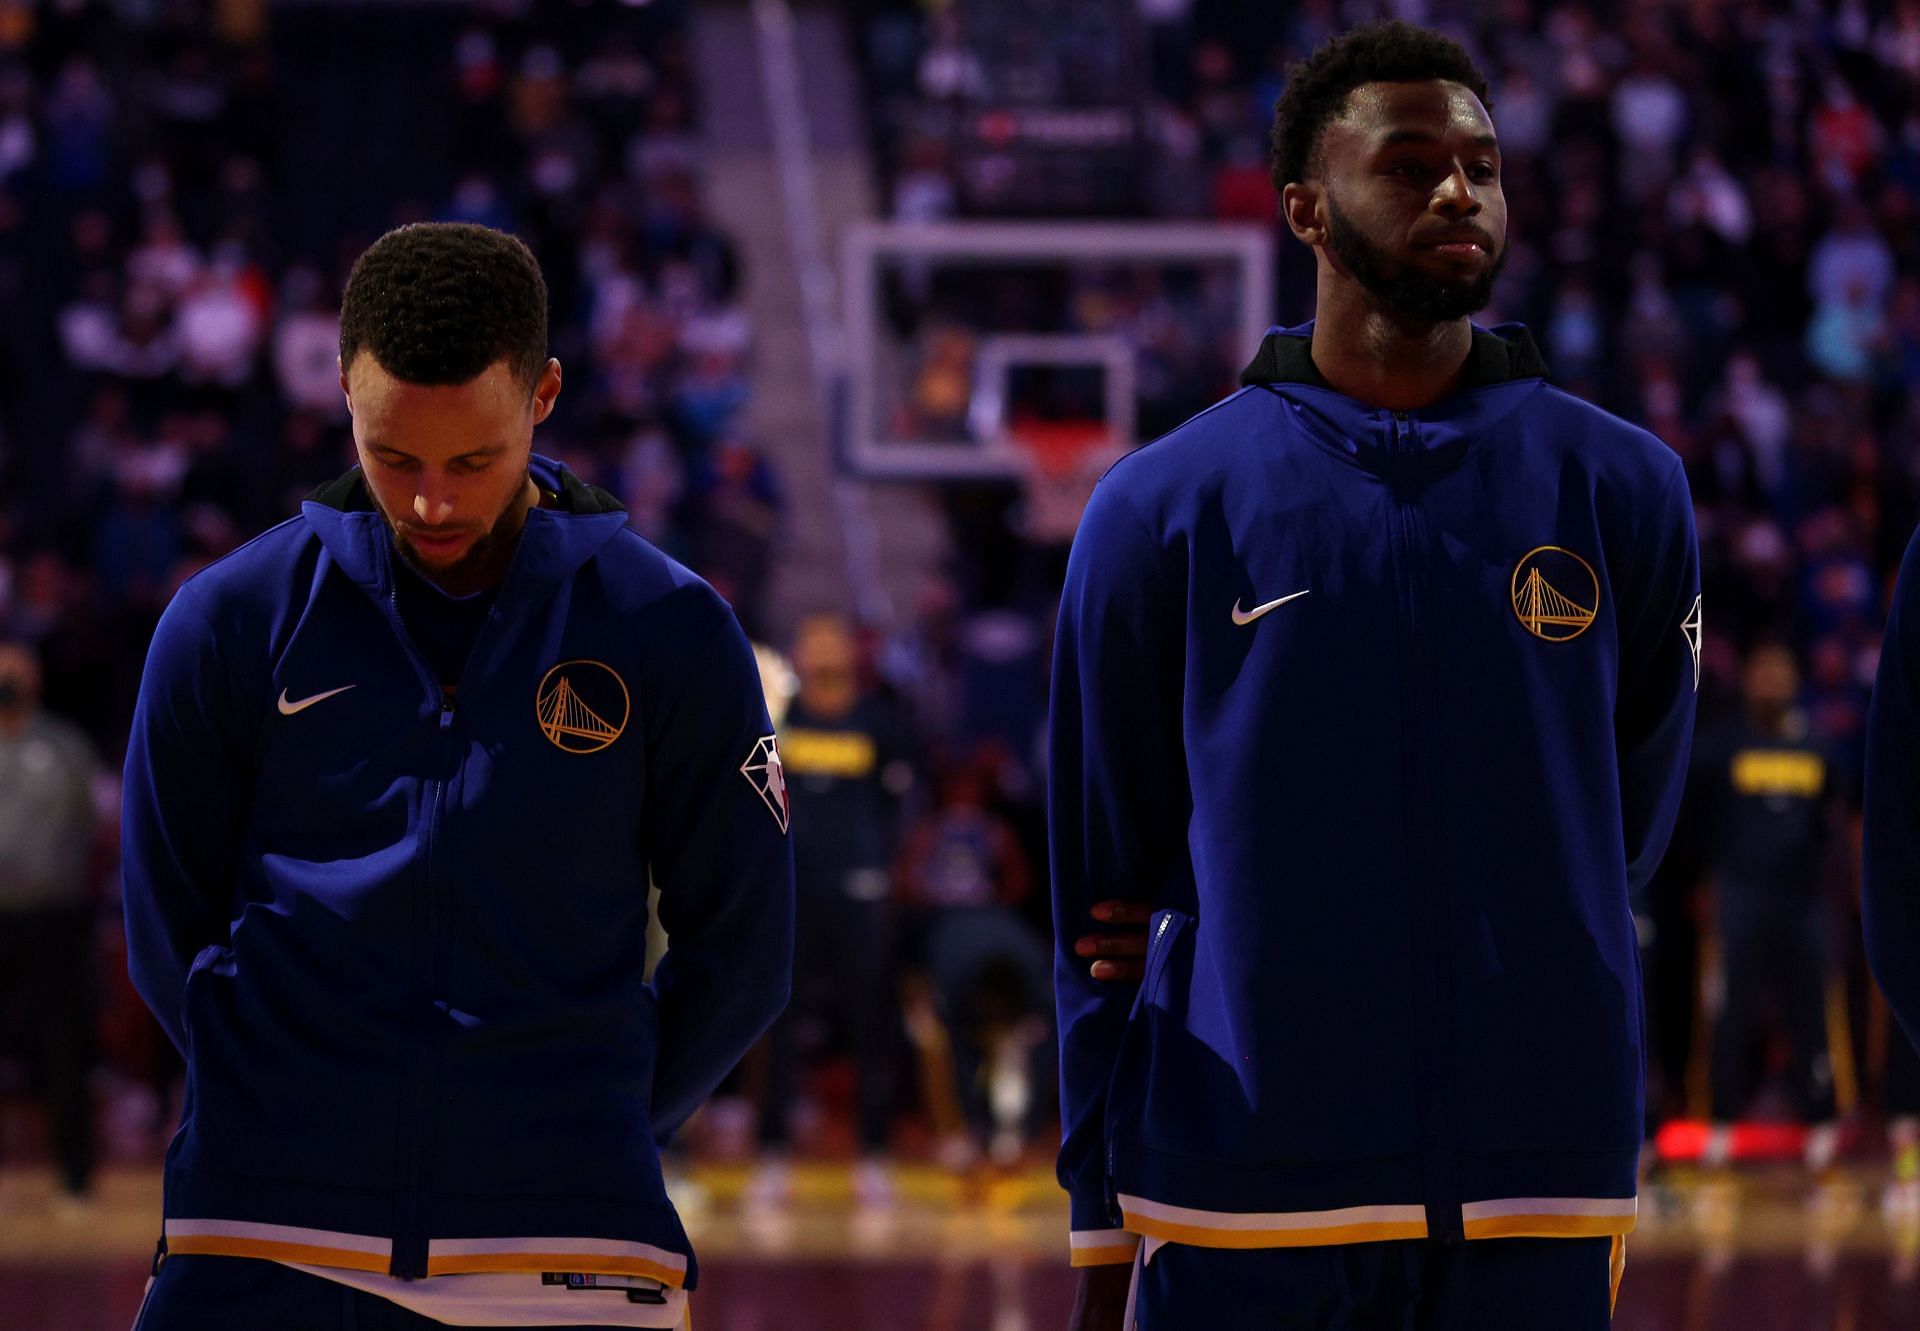 Steph Curry and Andrew Wiggins lining up in a game for the Golden State Warriors